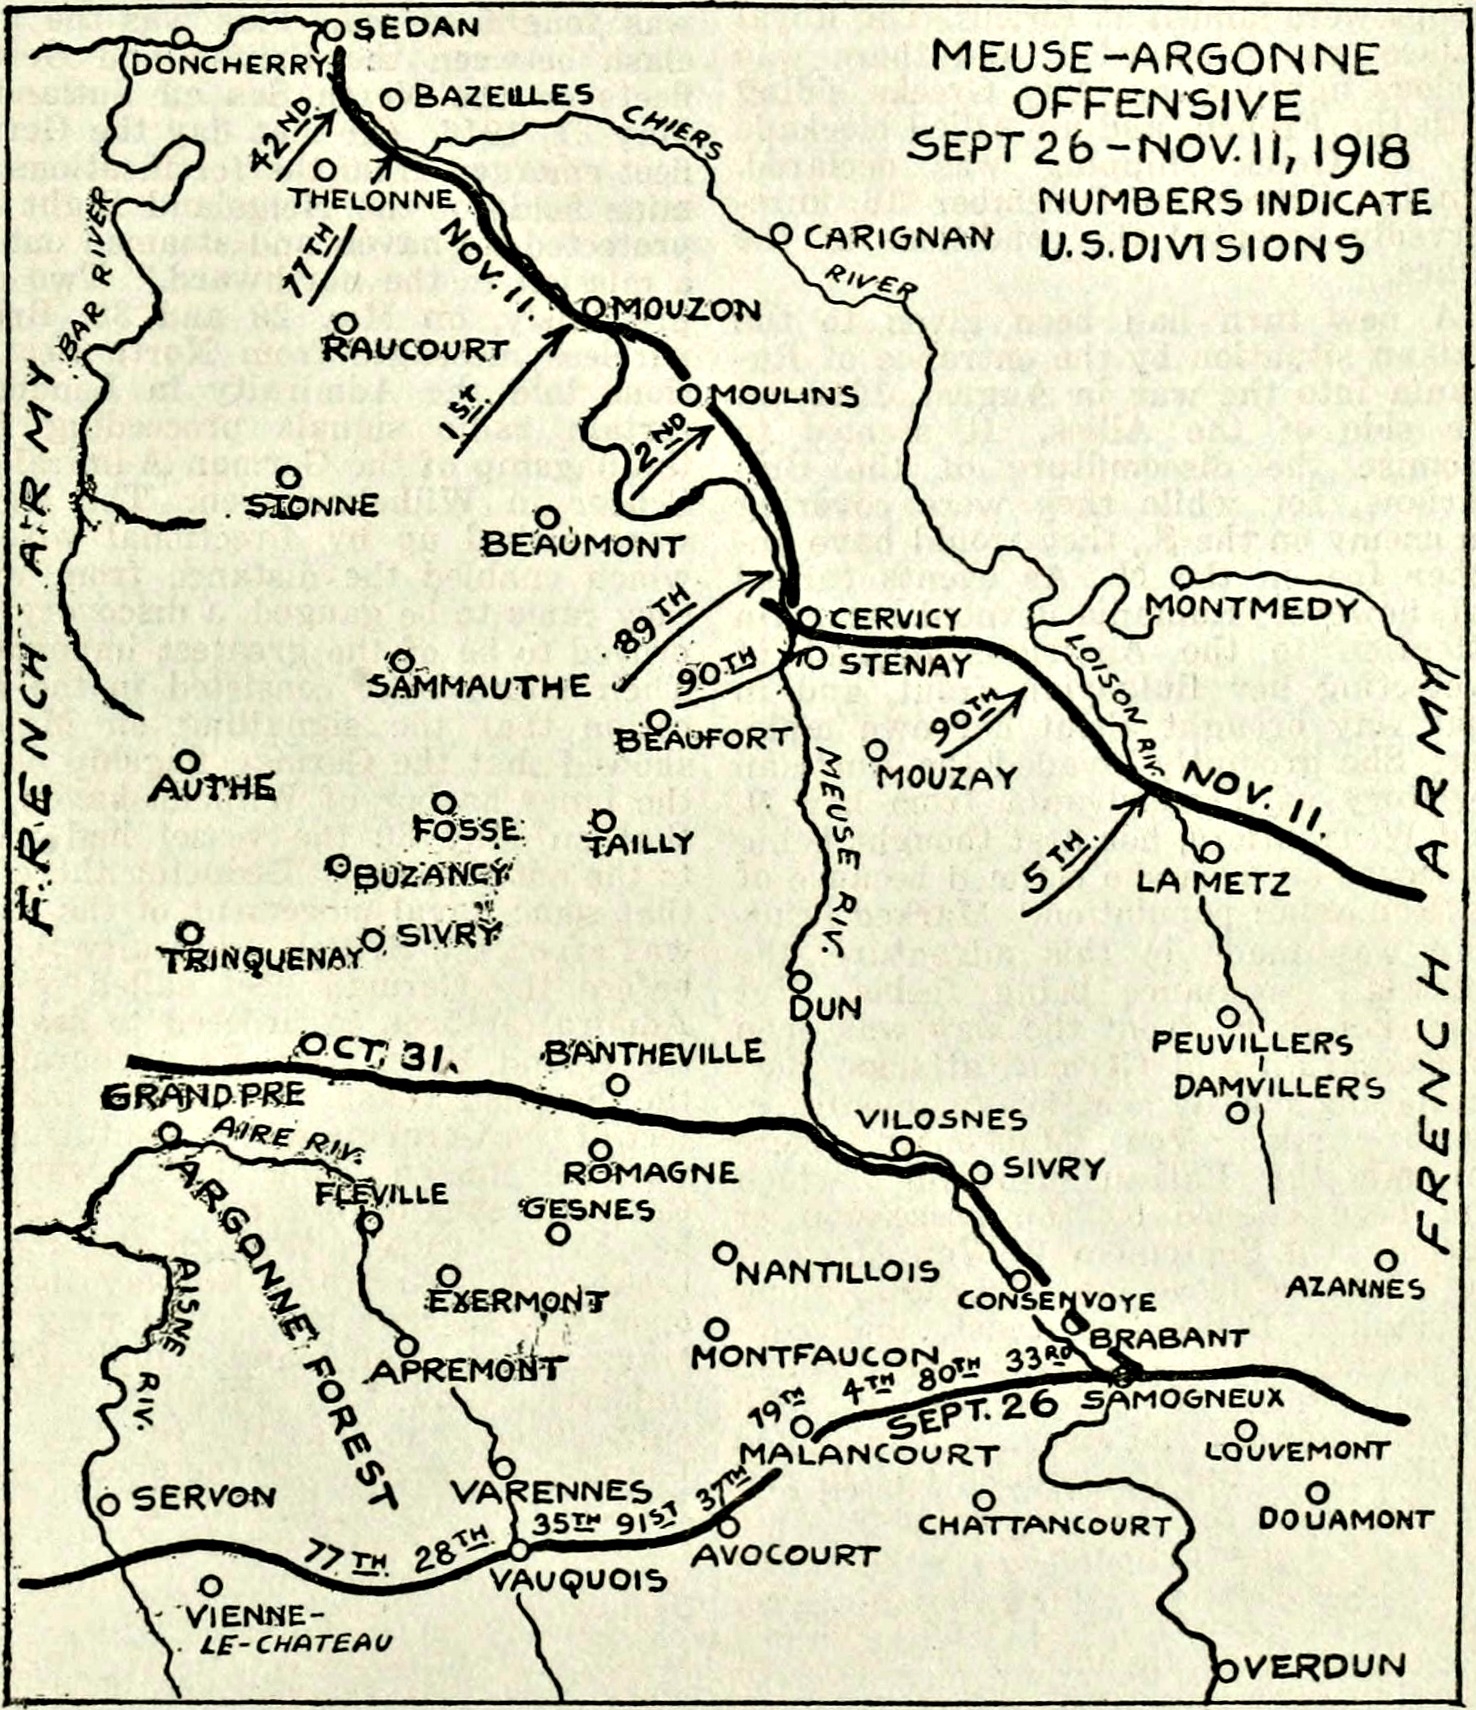 In early October 1918, the Allied forces including the "Lost Battalion's 77th Division, attacked the wide German defensive line. 